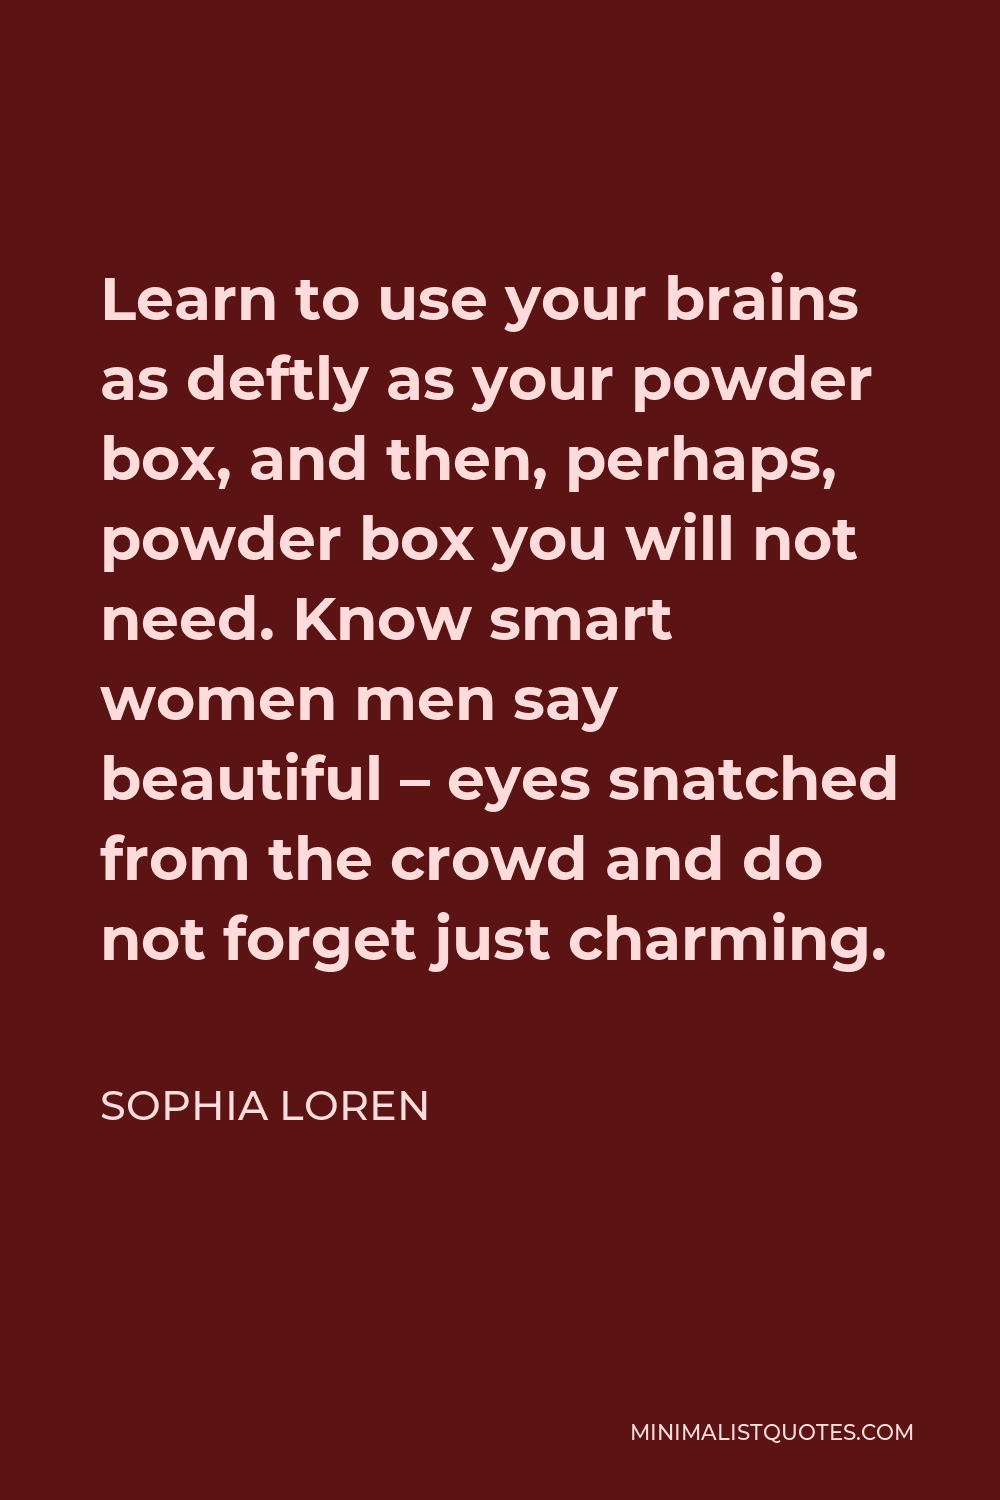 Sophia Loren Quote - Learn to use your brains as deftly as your powder box, and then, perhaps, powder box you will not need. Know smart women men say beautiful – eyes snatched from the crowd and do not forget just charming.